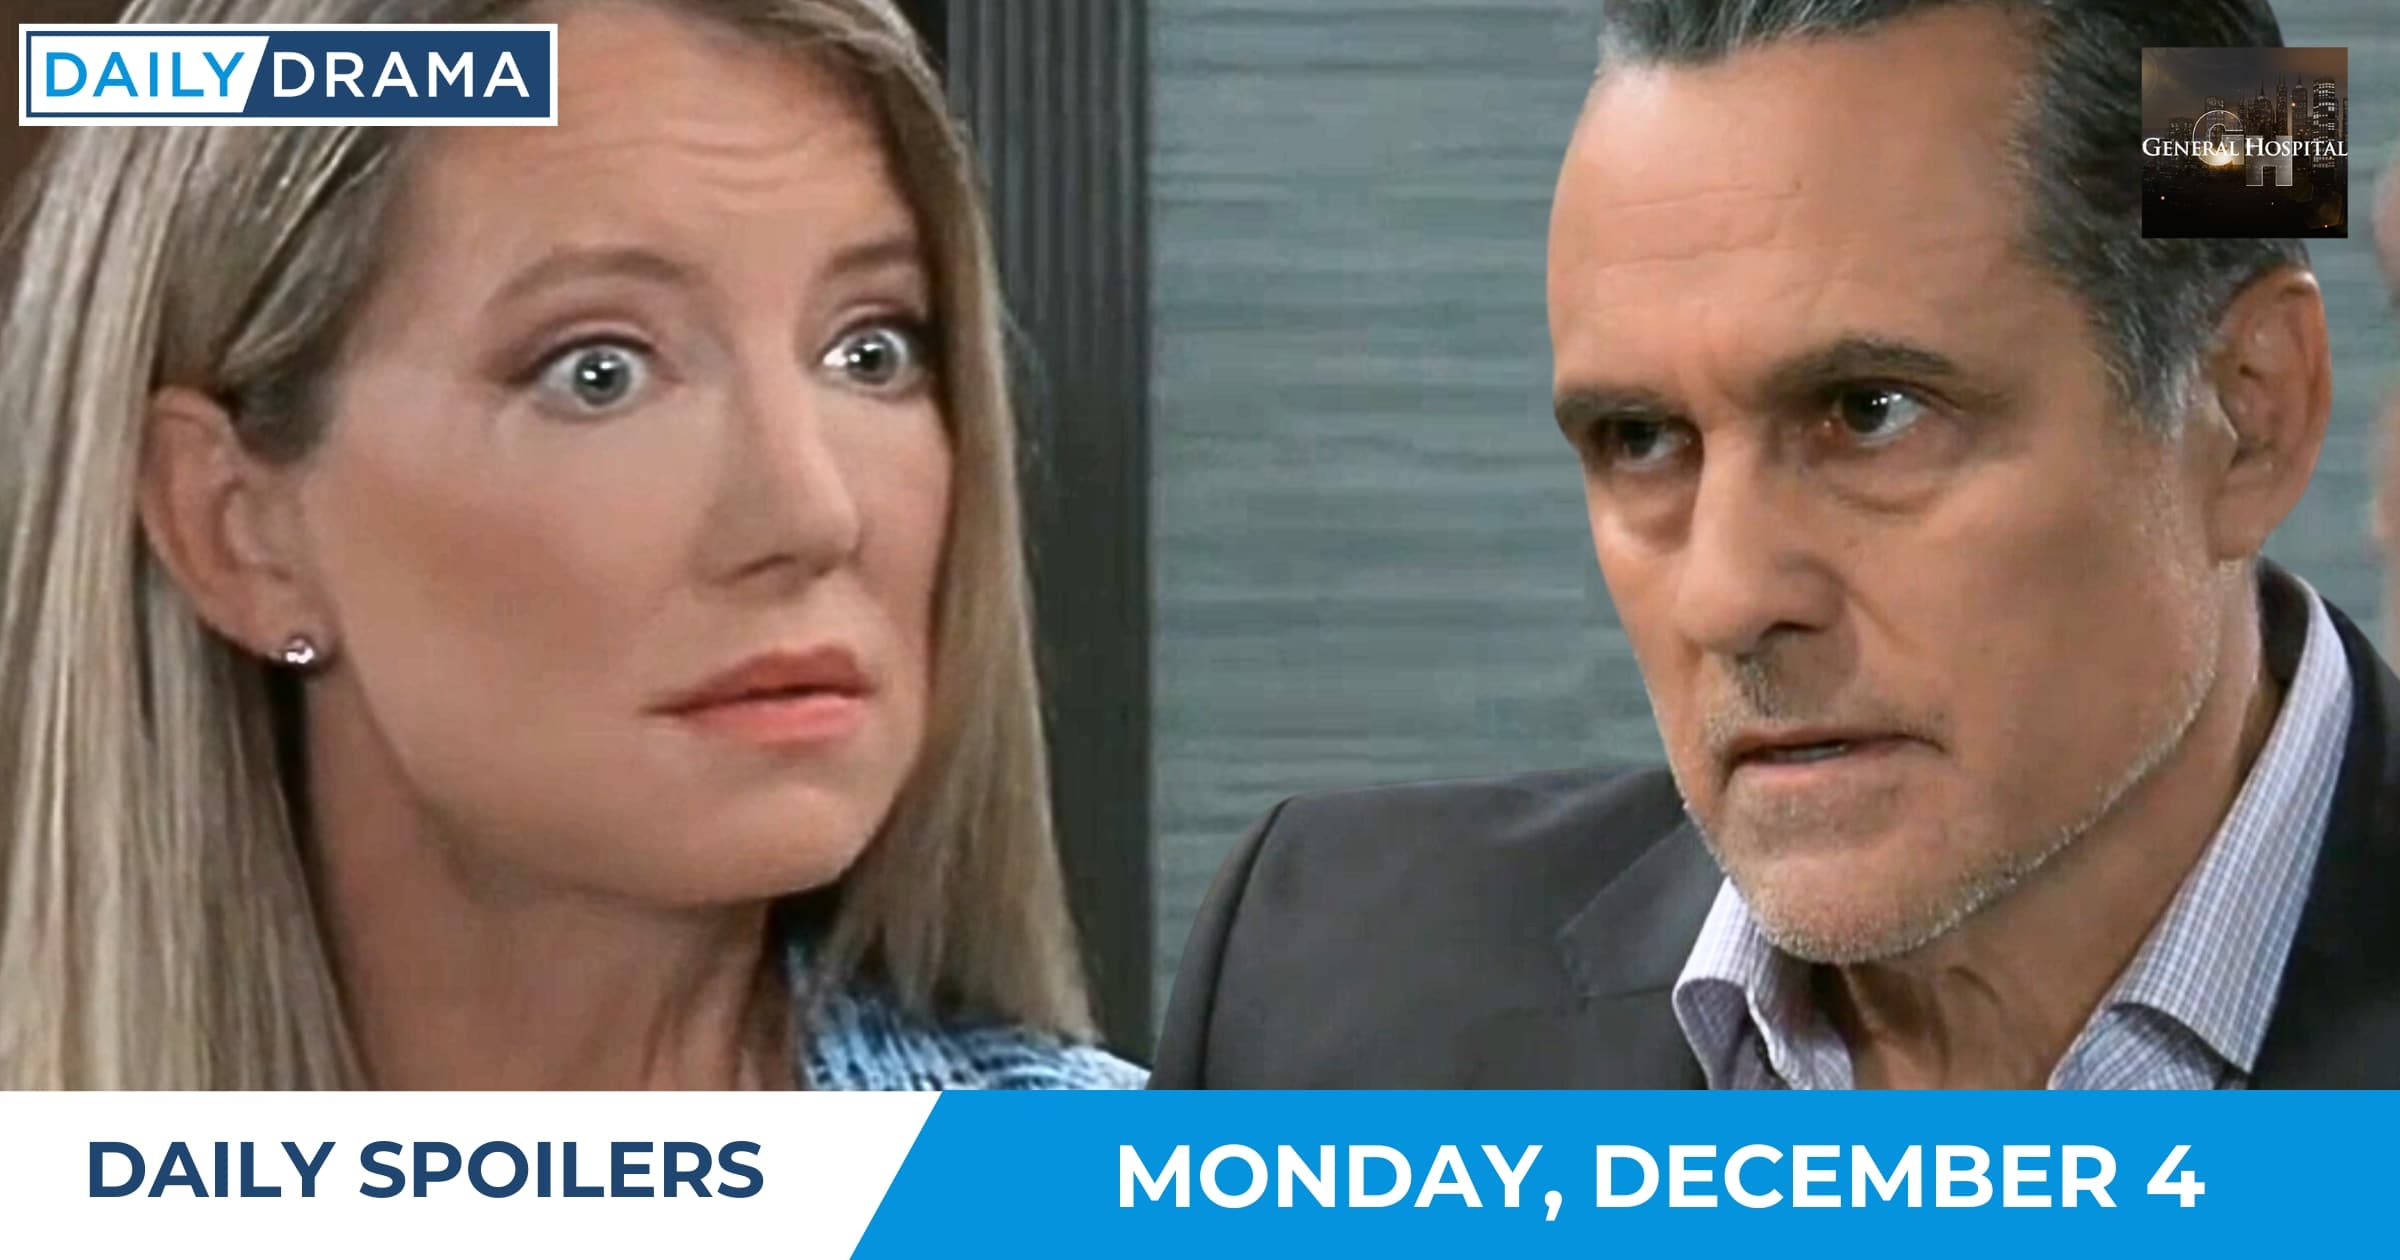 General Hospital Daily Spoilers - Dec 4 - Nina and Sonny